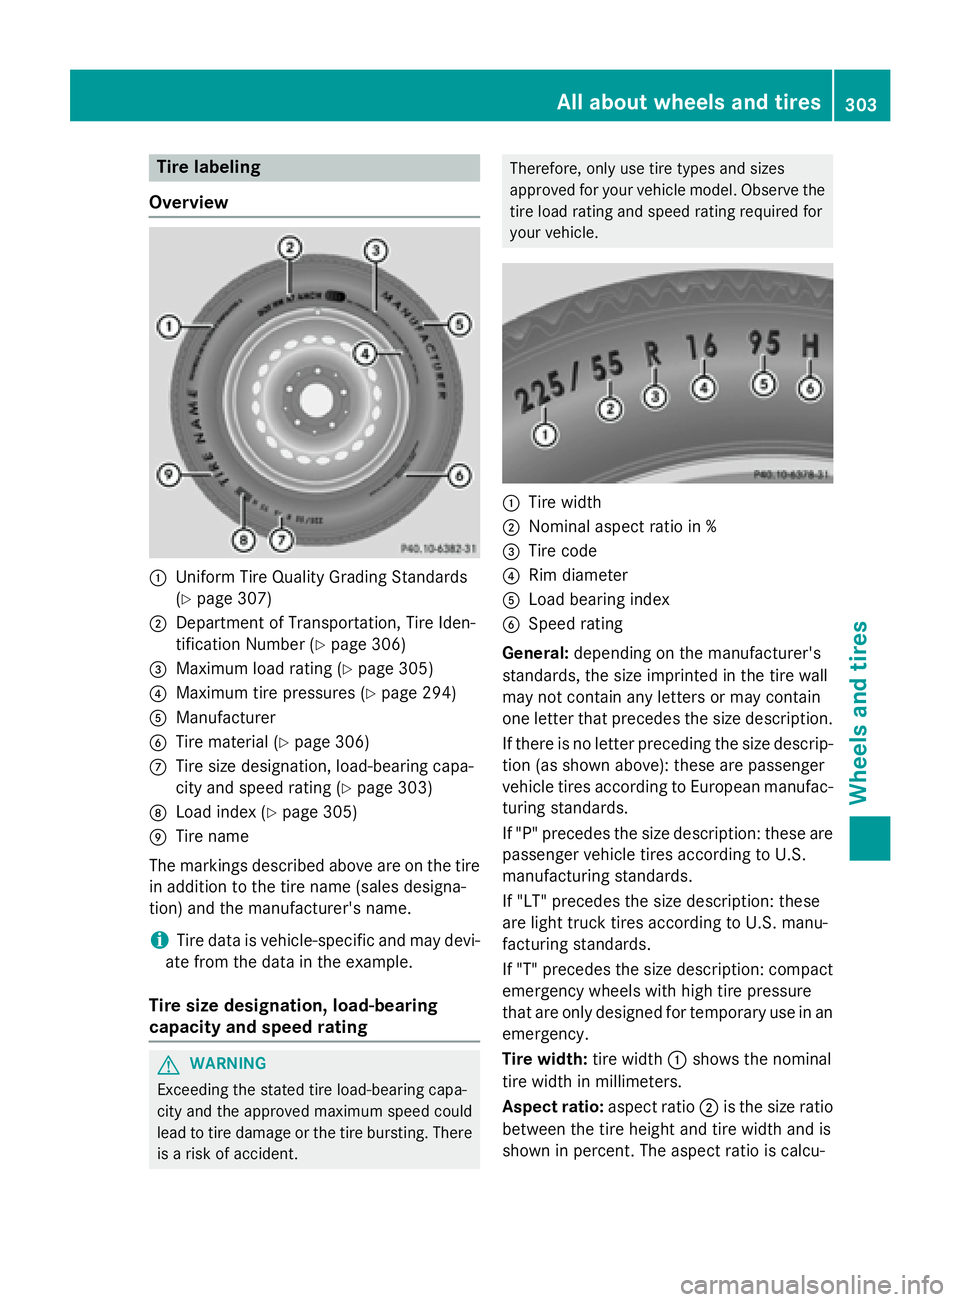 MERCEDES-BENZ WAGON 2016  Owners Manual Tire labeling
Overview
:Uniform Tire Quality Grading Standards
(
Ypage 307)
;Department of Transportation, Tire Iden-
tification Number (
Ypage 306)
=Maximum load rating (Ypage 305)
?Maximum tire pres